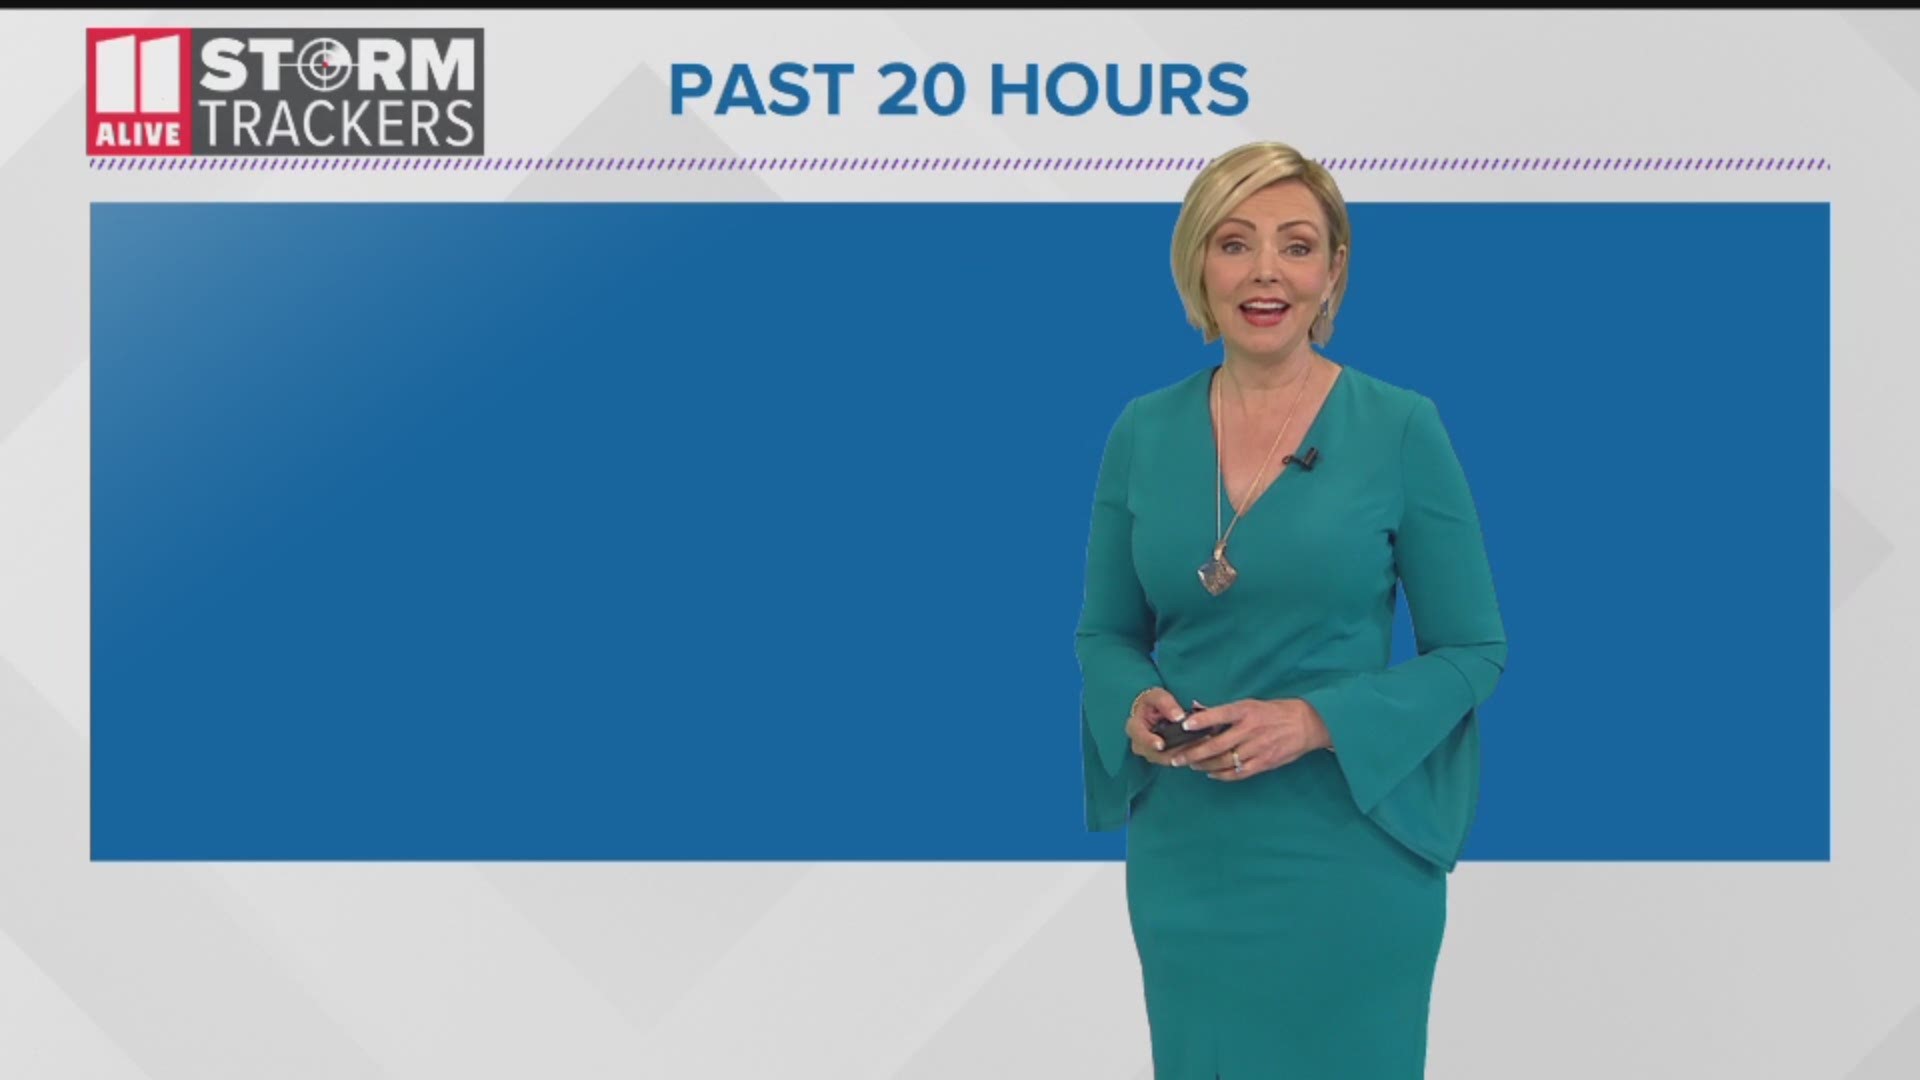 11Alive StormTracker meteorologist Samantha Mohr has the forecast for Sunday, May 19, 2019.